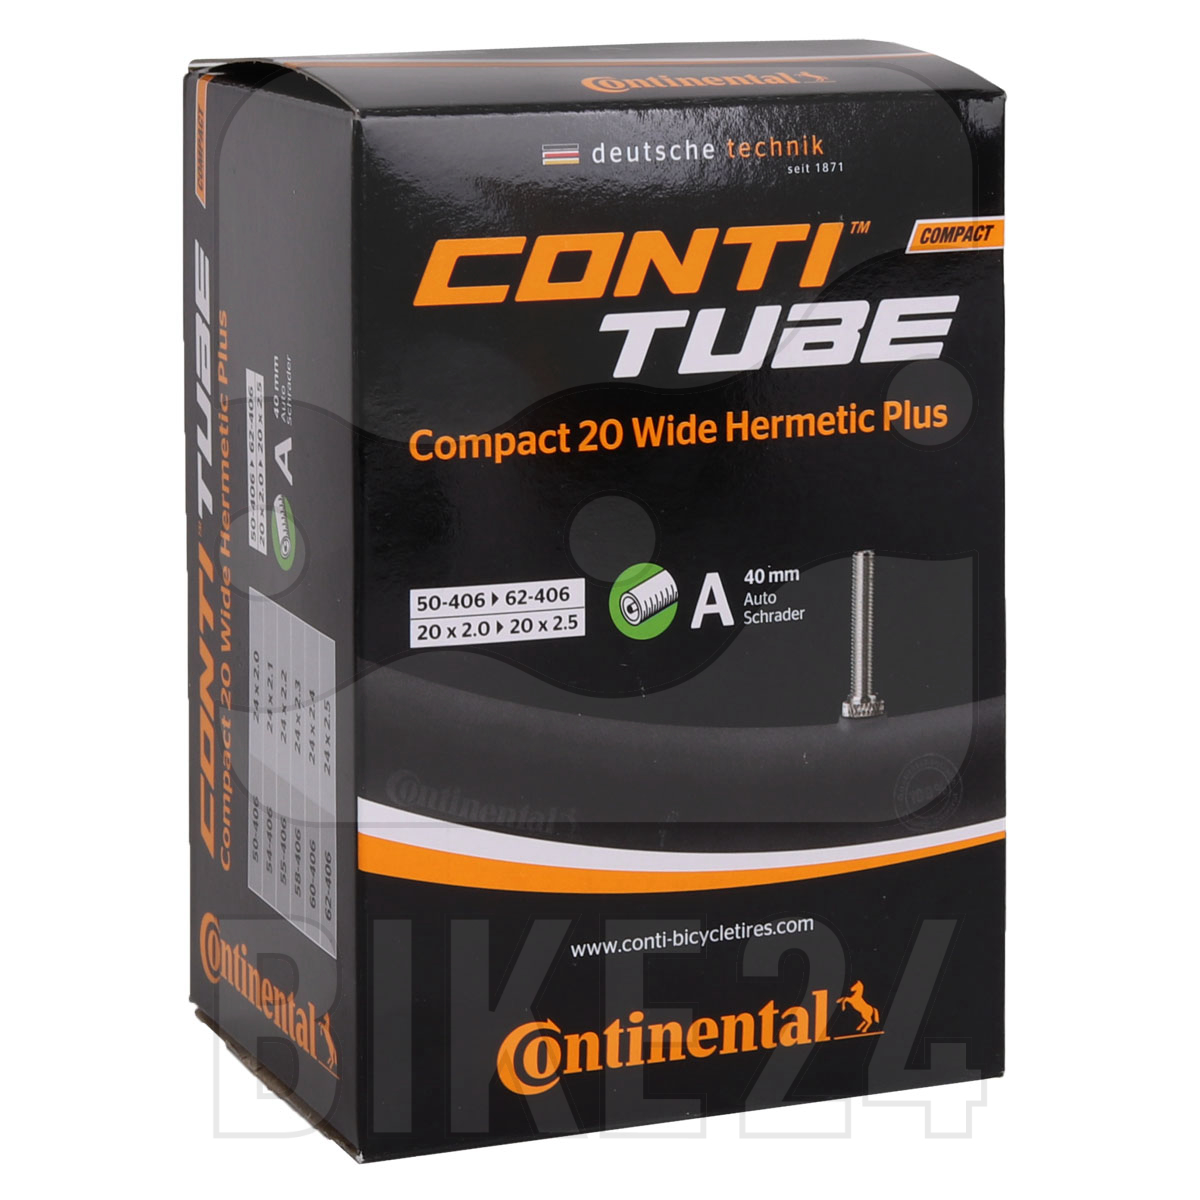 Picture of Continental Compact 20 Hermetic Plus Tube